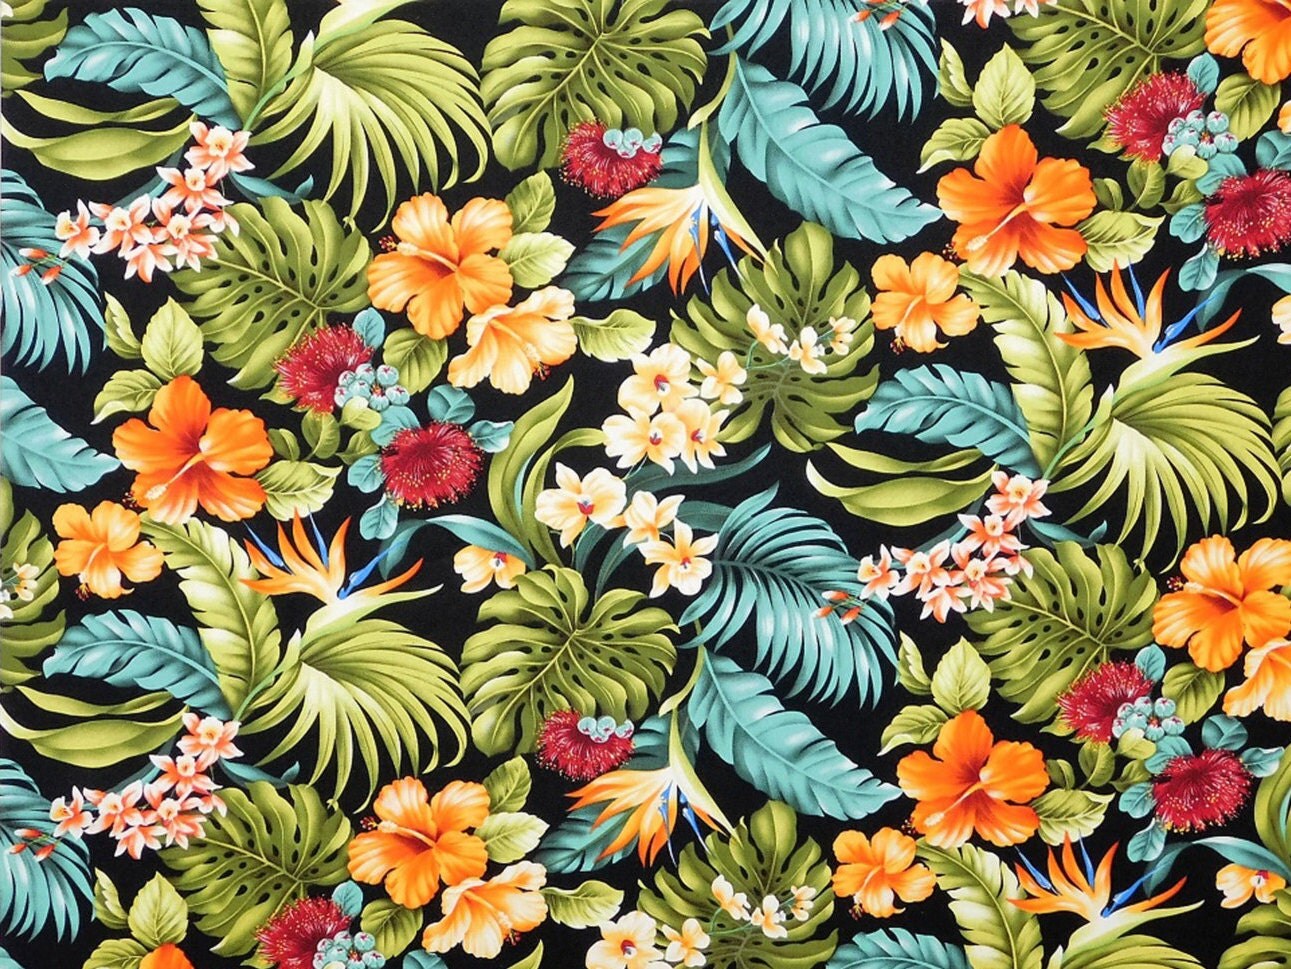 Floral Fabric Tropical Print Cotton by HawaiianFabricNBYond